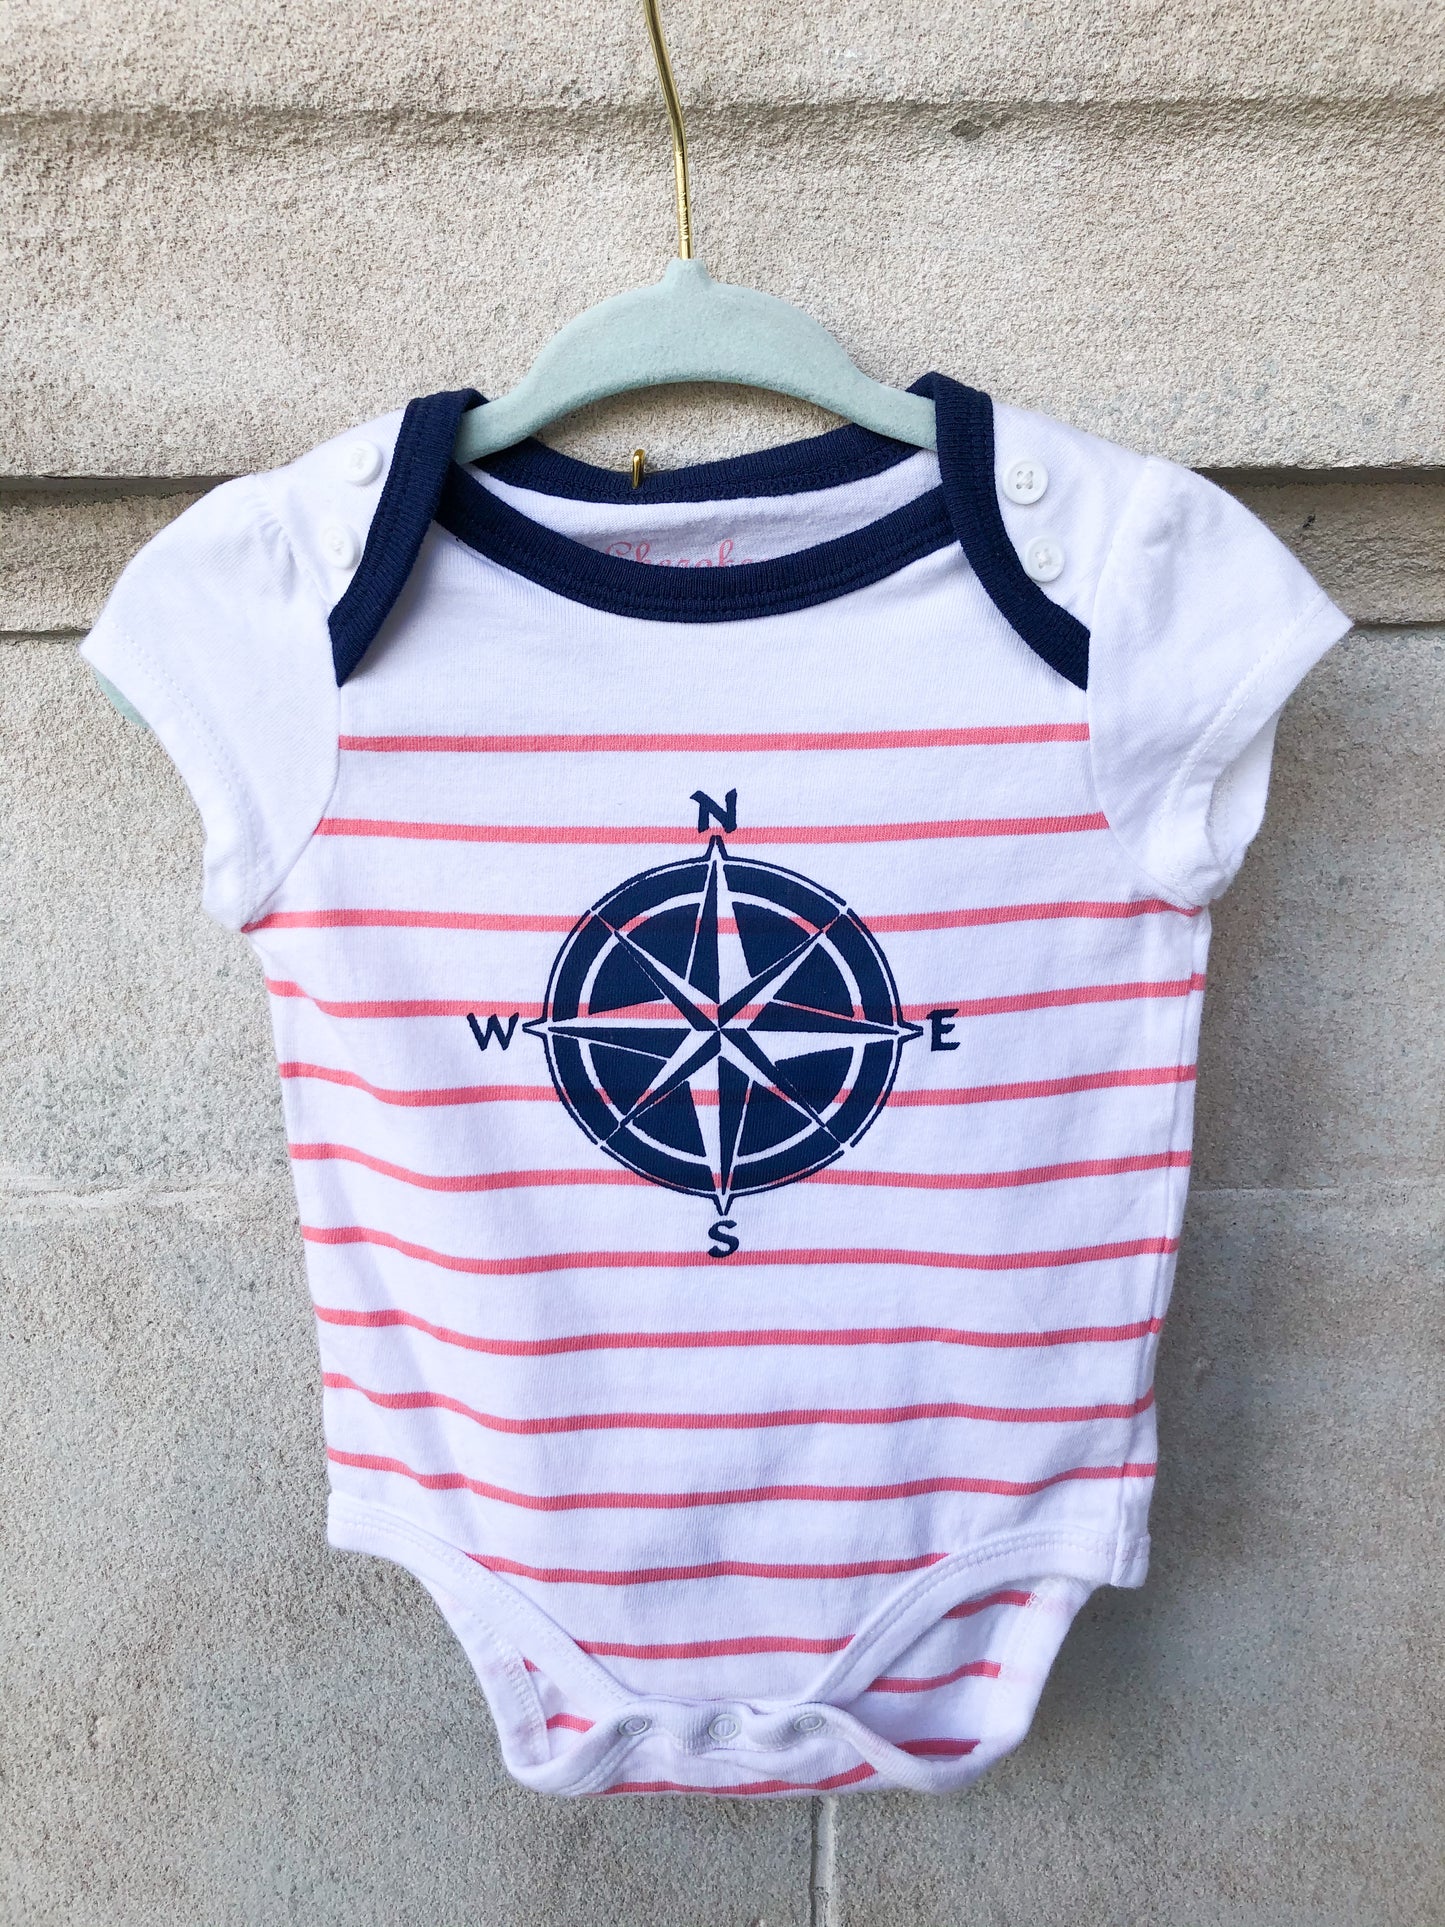 Compass Pink Stripe Baby Bodysuit Upcycled by Eco Pretty - 3 Months